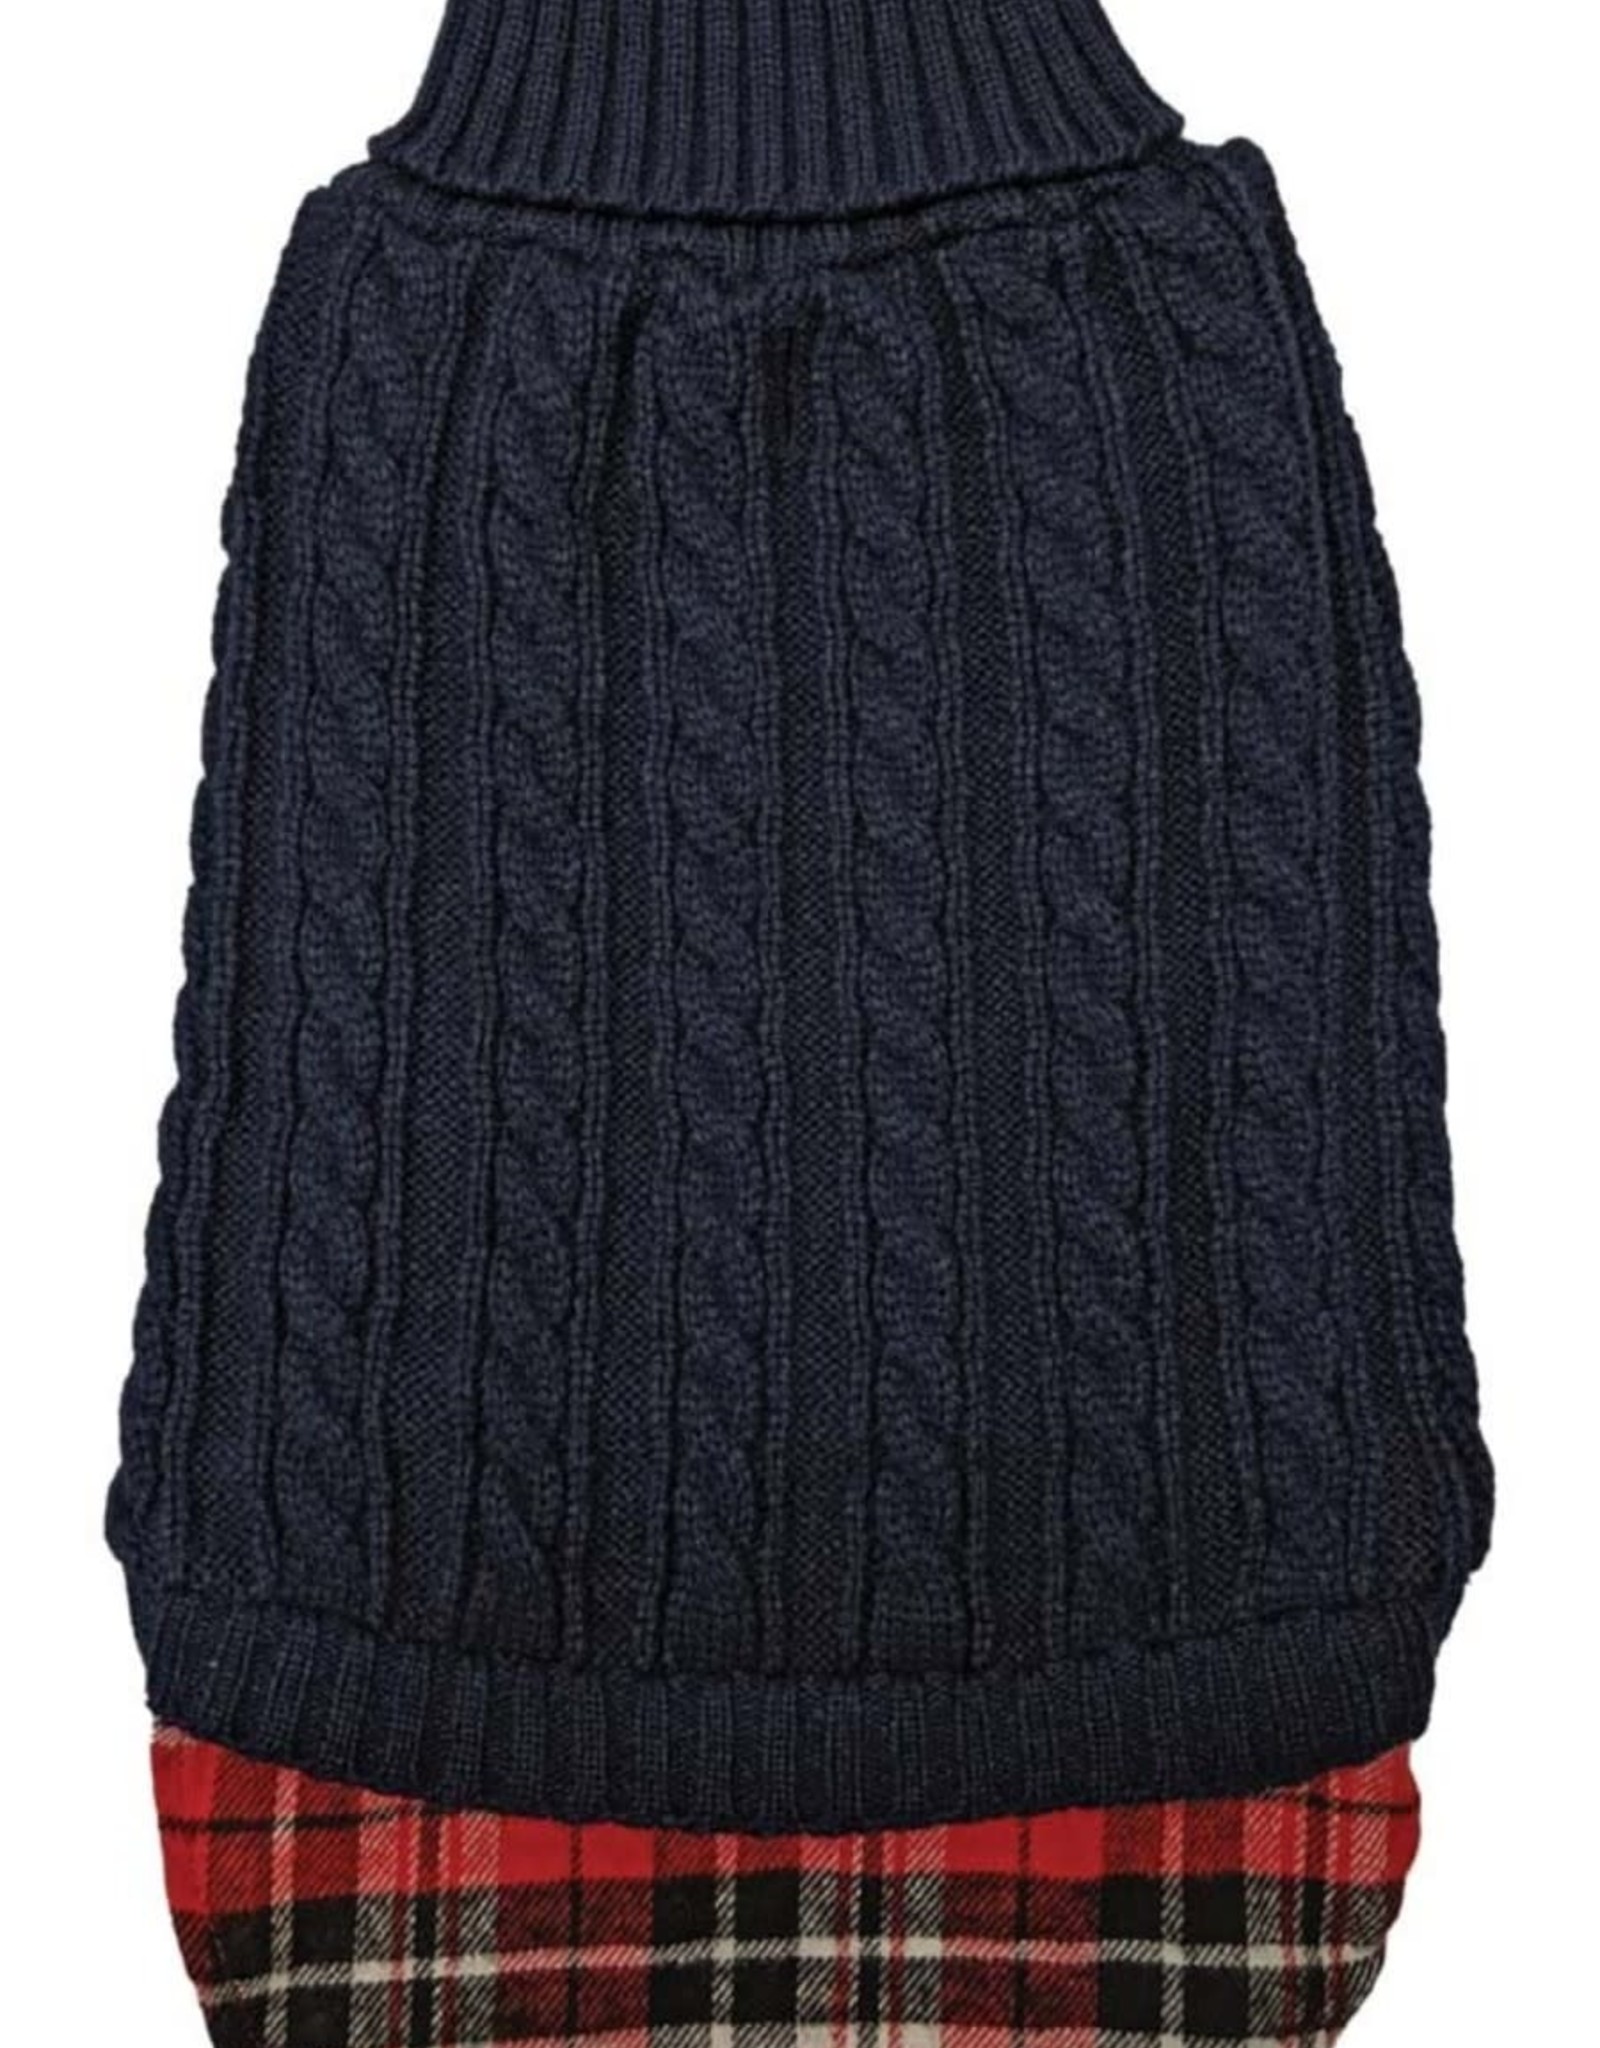 FASHION PET (ETHICAL) FAS Un-Tucked Cable Dog Sweater Navy Medium